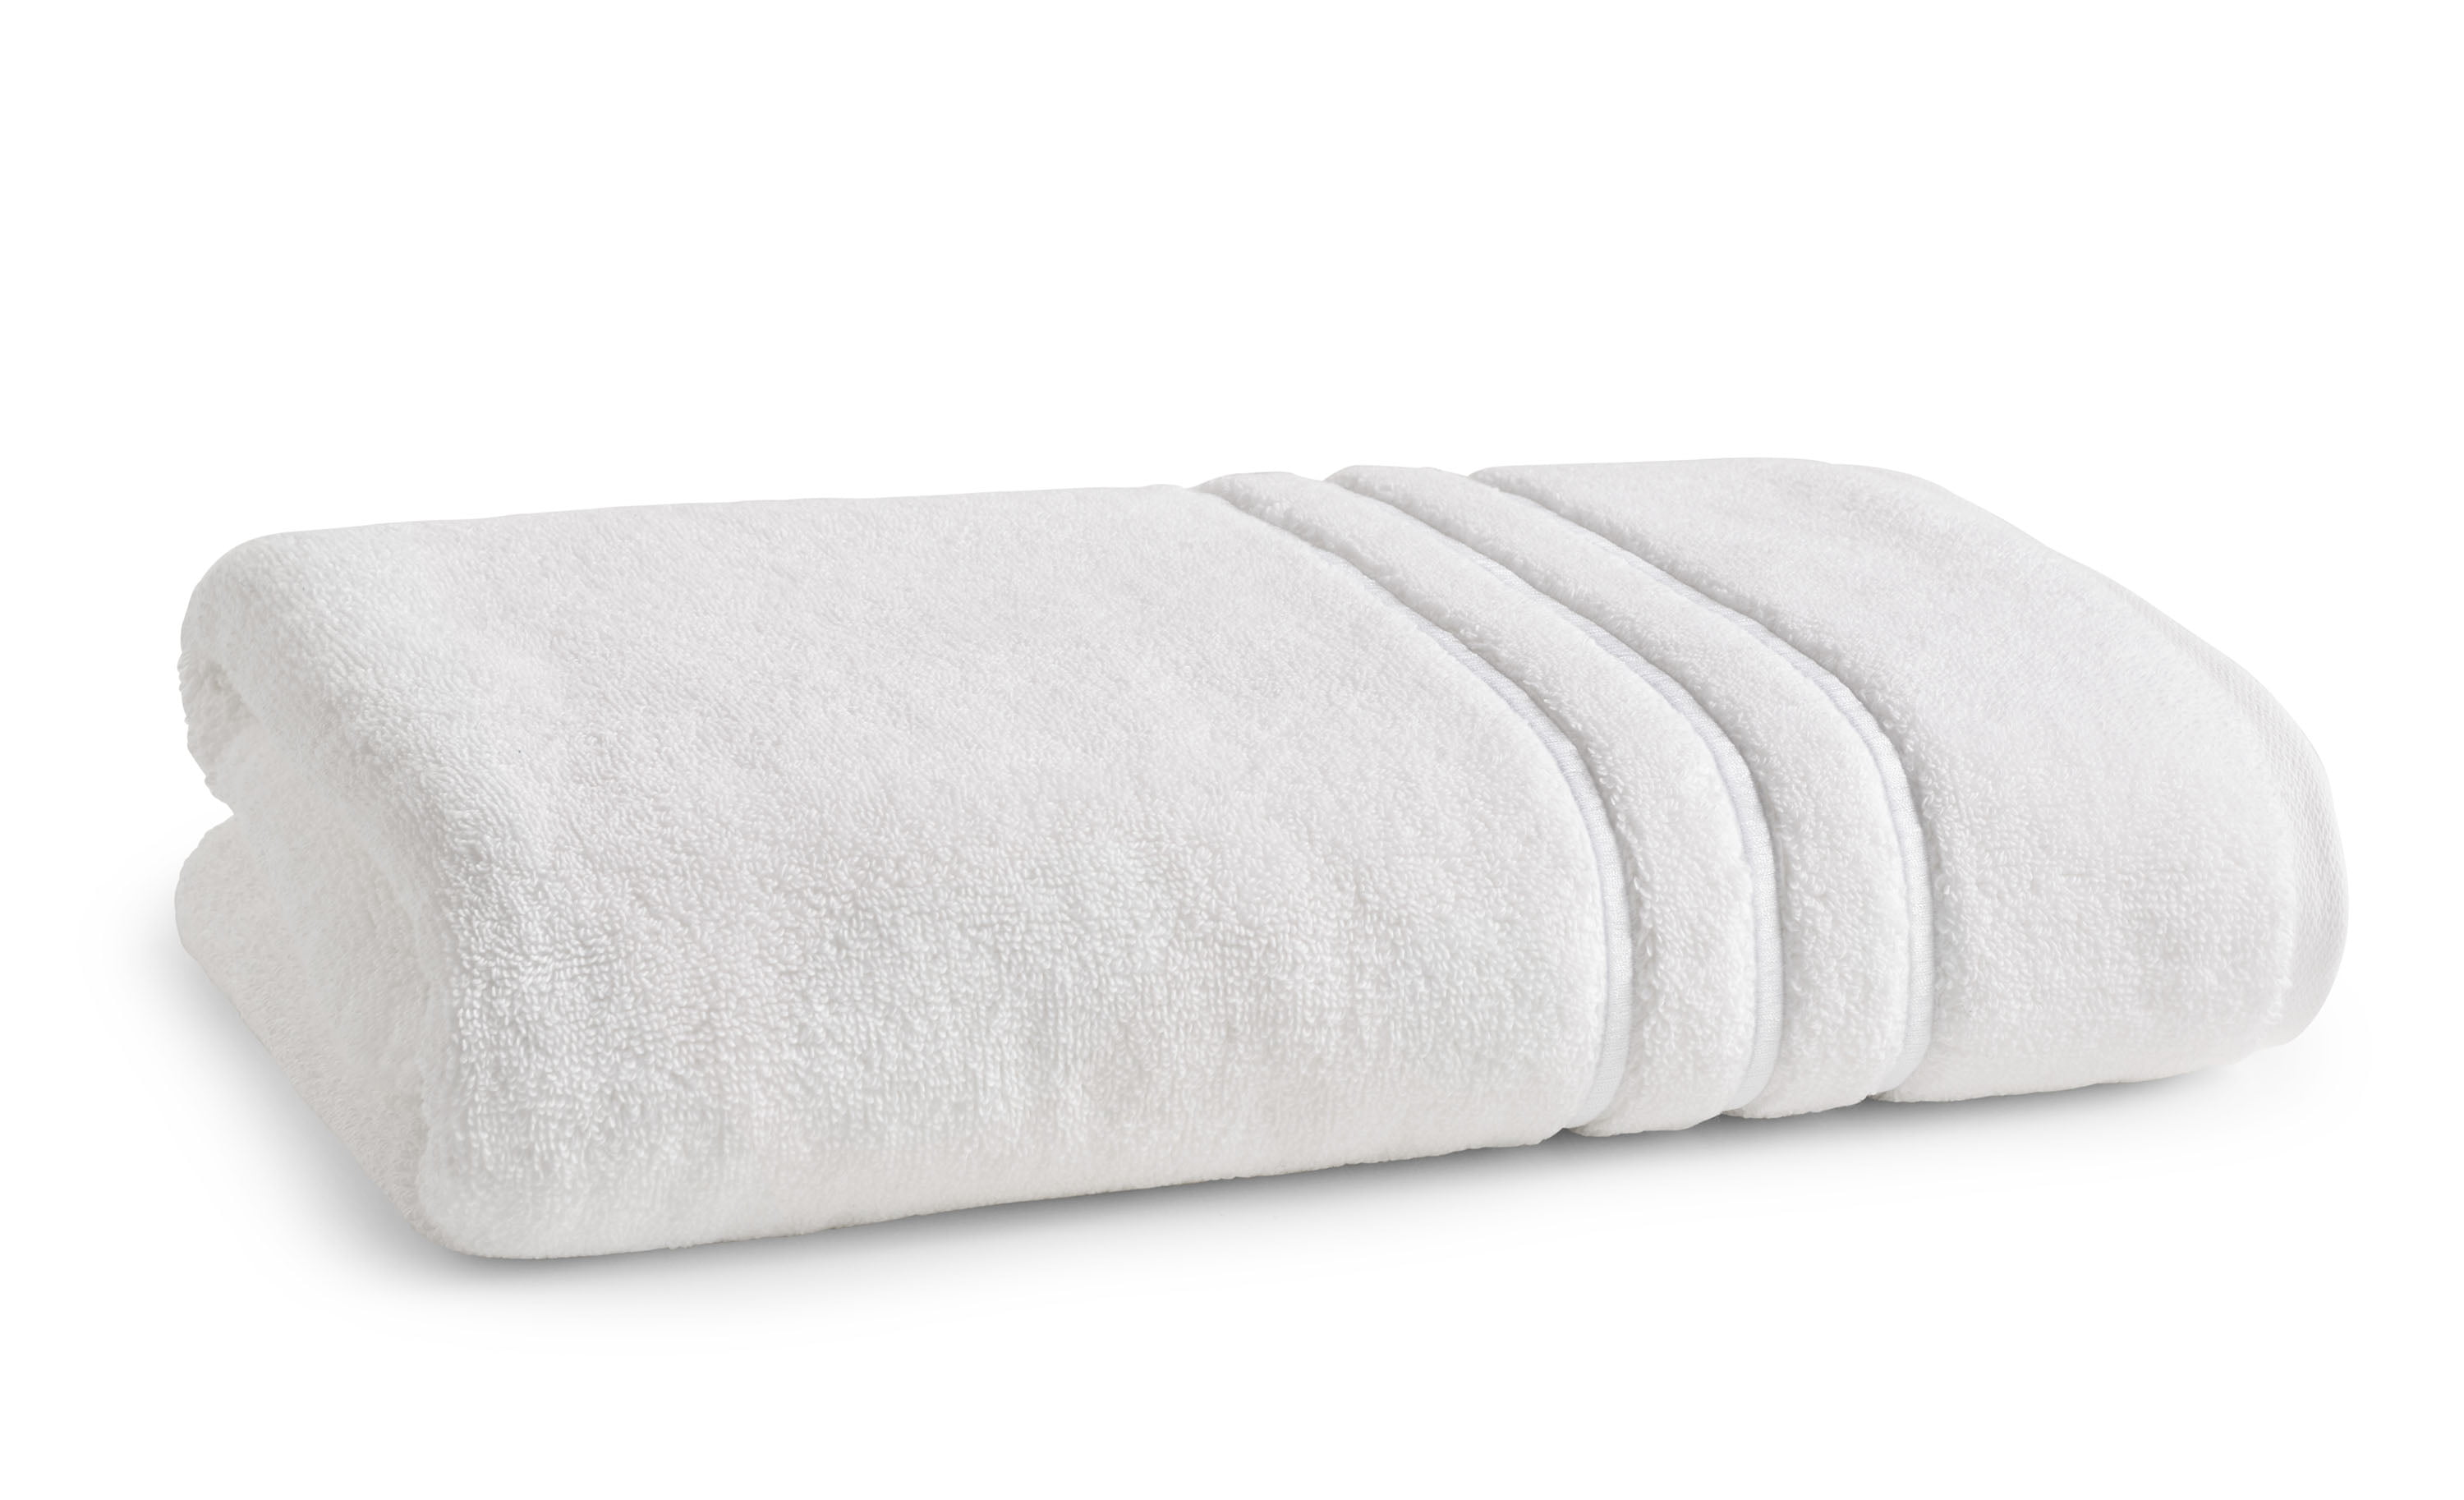 2 White Bath Towels hotel quality Egyptian cotton blended White Bath Towels, 